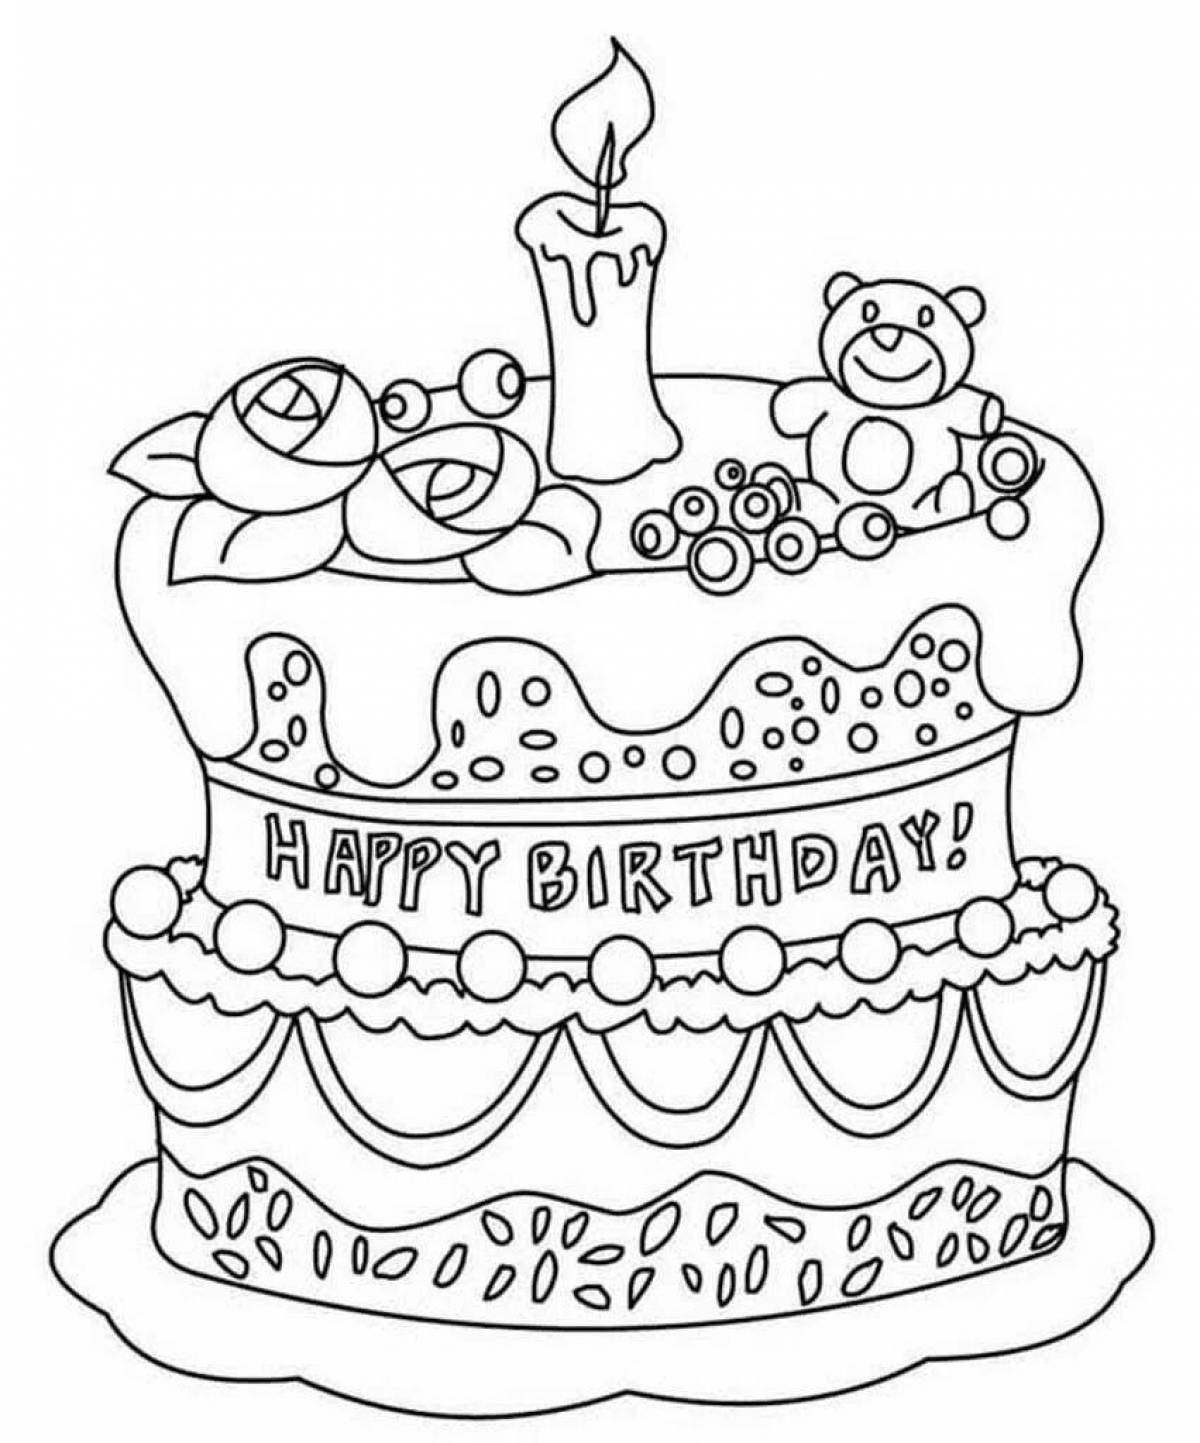 Playful cake coloring for girls